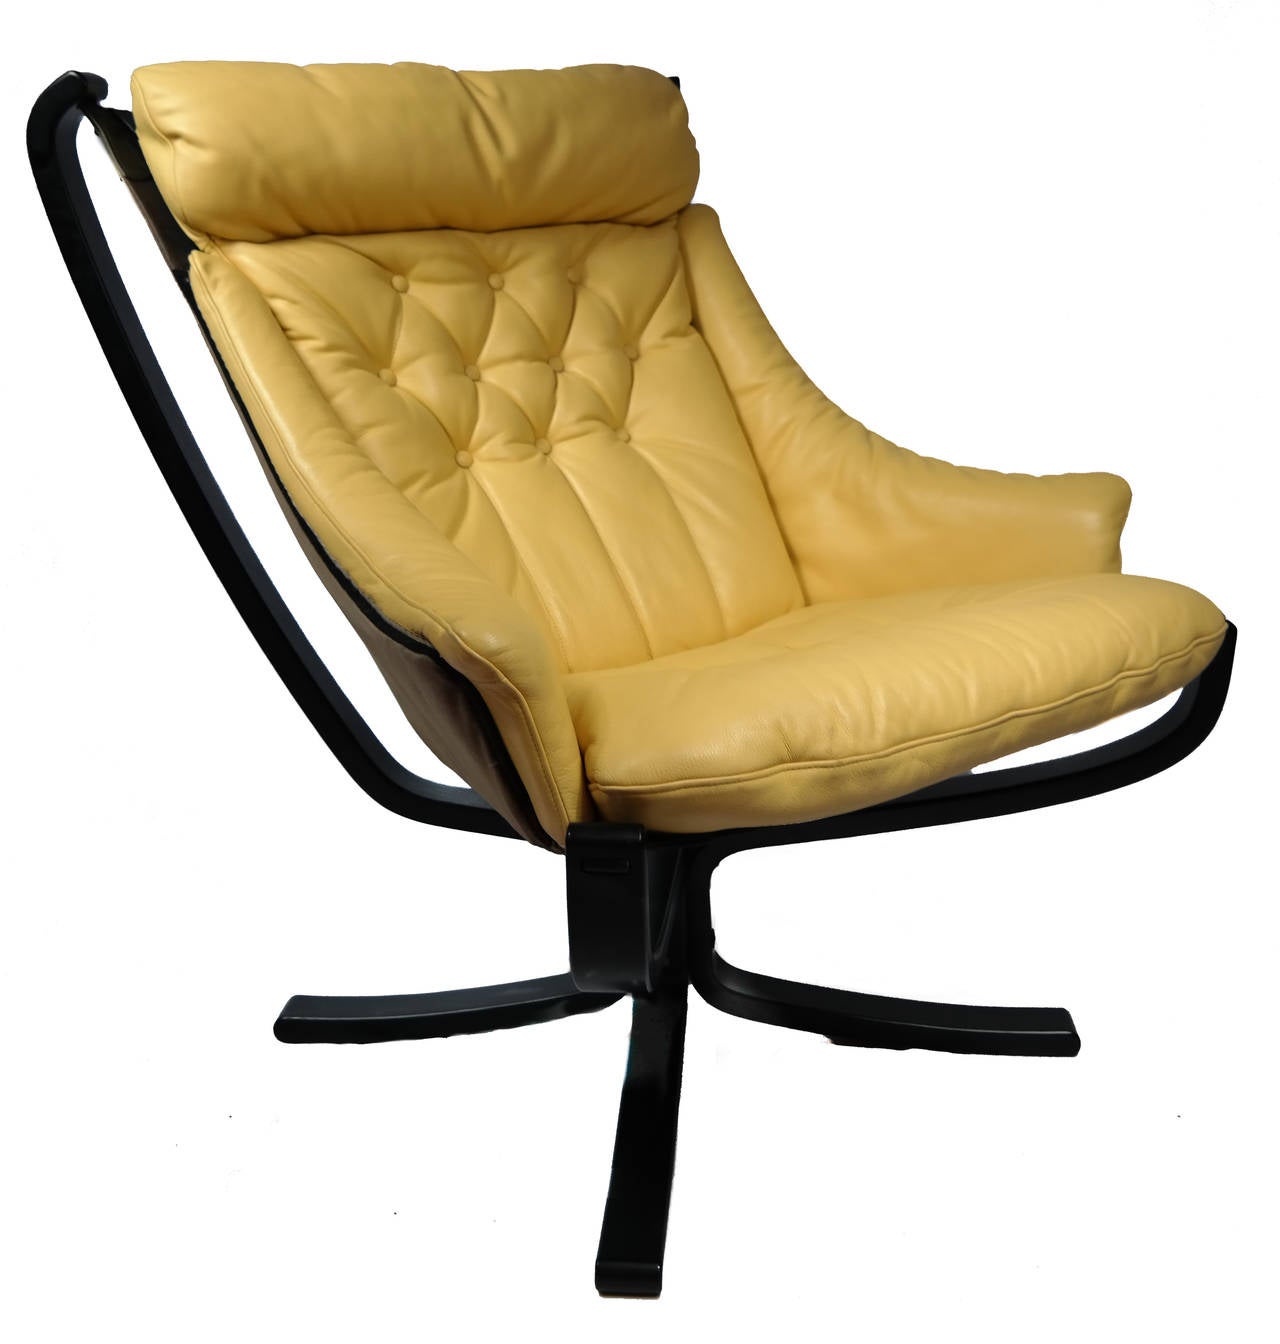 Falcon sling lounge chair, circa 1970. Designed by Sigurd Ressell (1920-2010), multi-part bentwood frame holding suspended seat cushion of original buttoned yellow leather by Poltrona Frau. Leather in great condition.